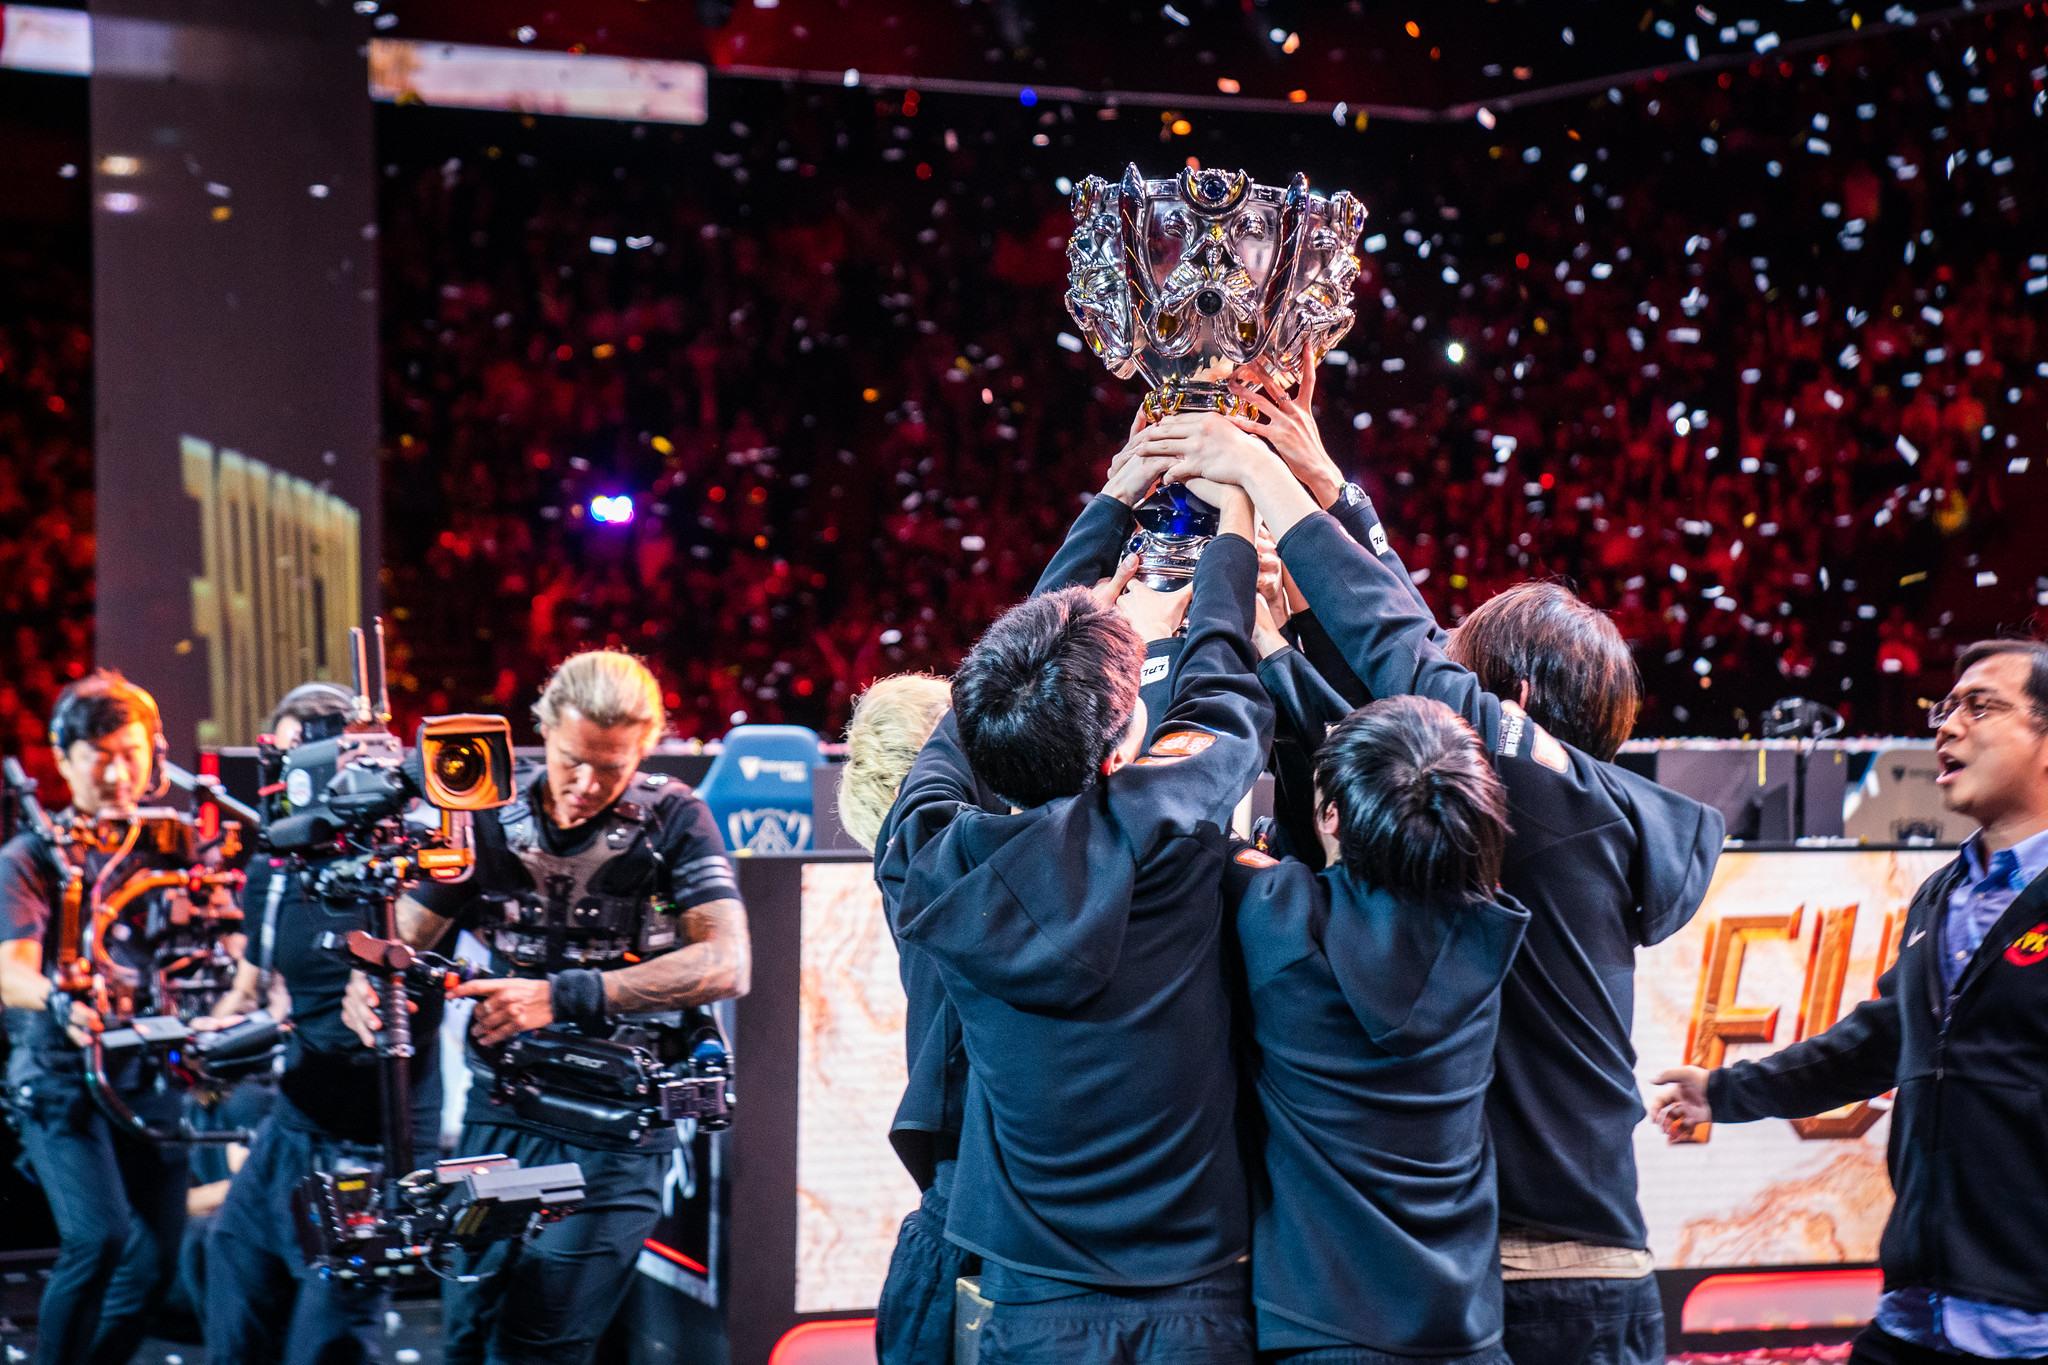 Worlds 2019] Louis Vuitton sends G2 and FPX Some Serious Swag